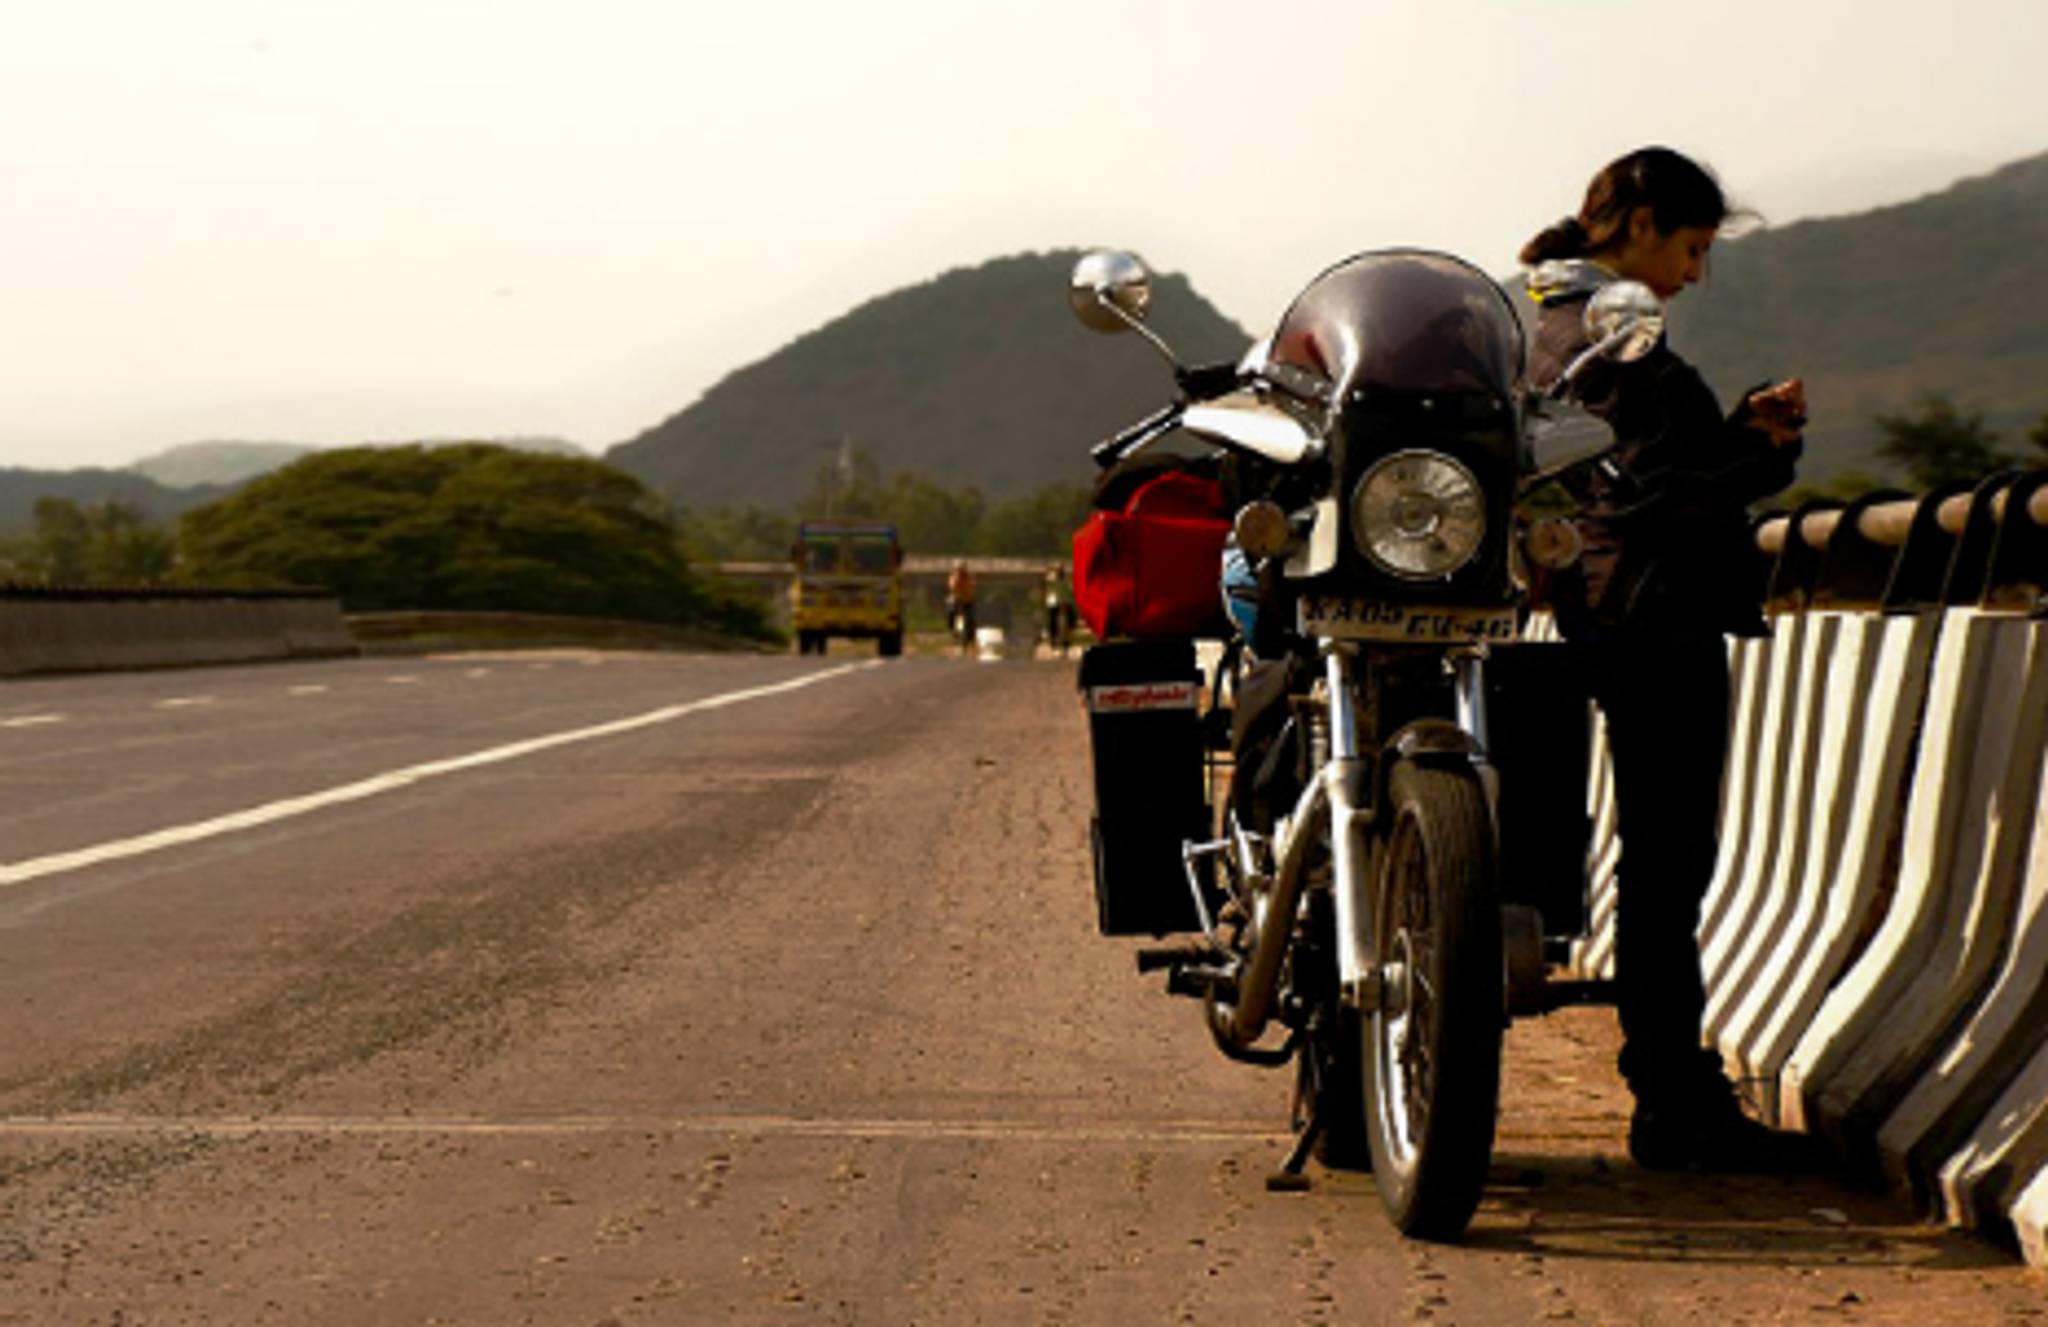 Royal Enfield: revving up a new generation of fans